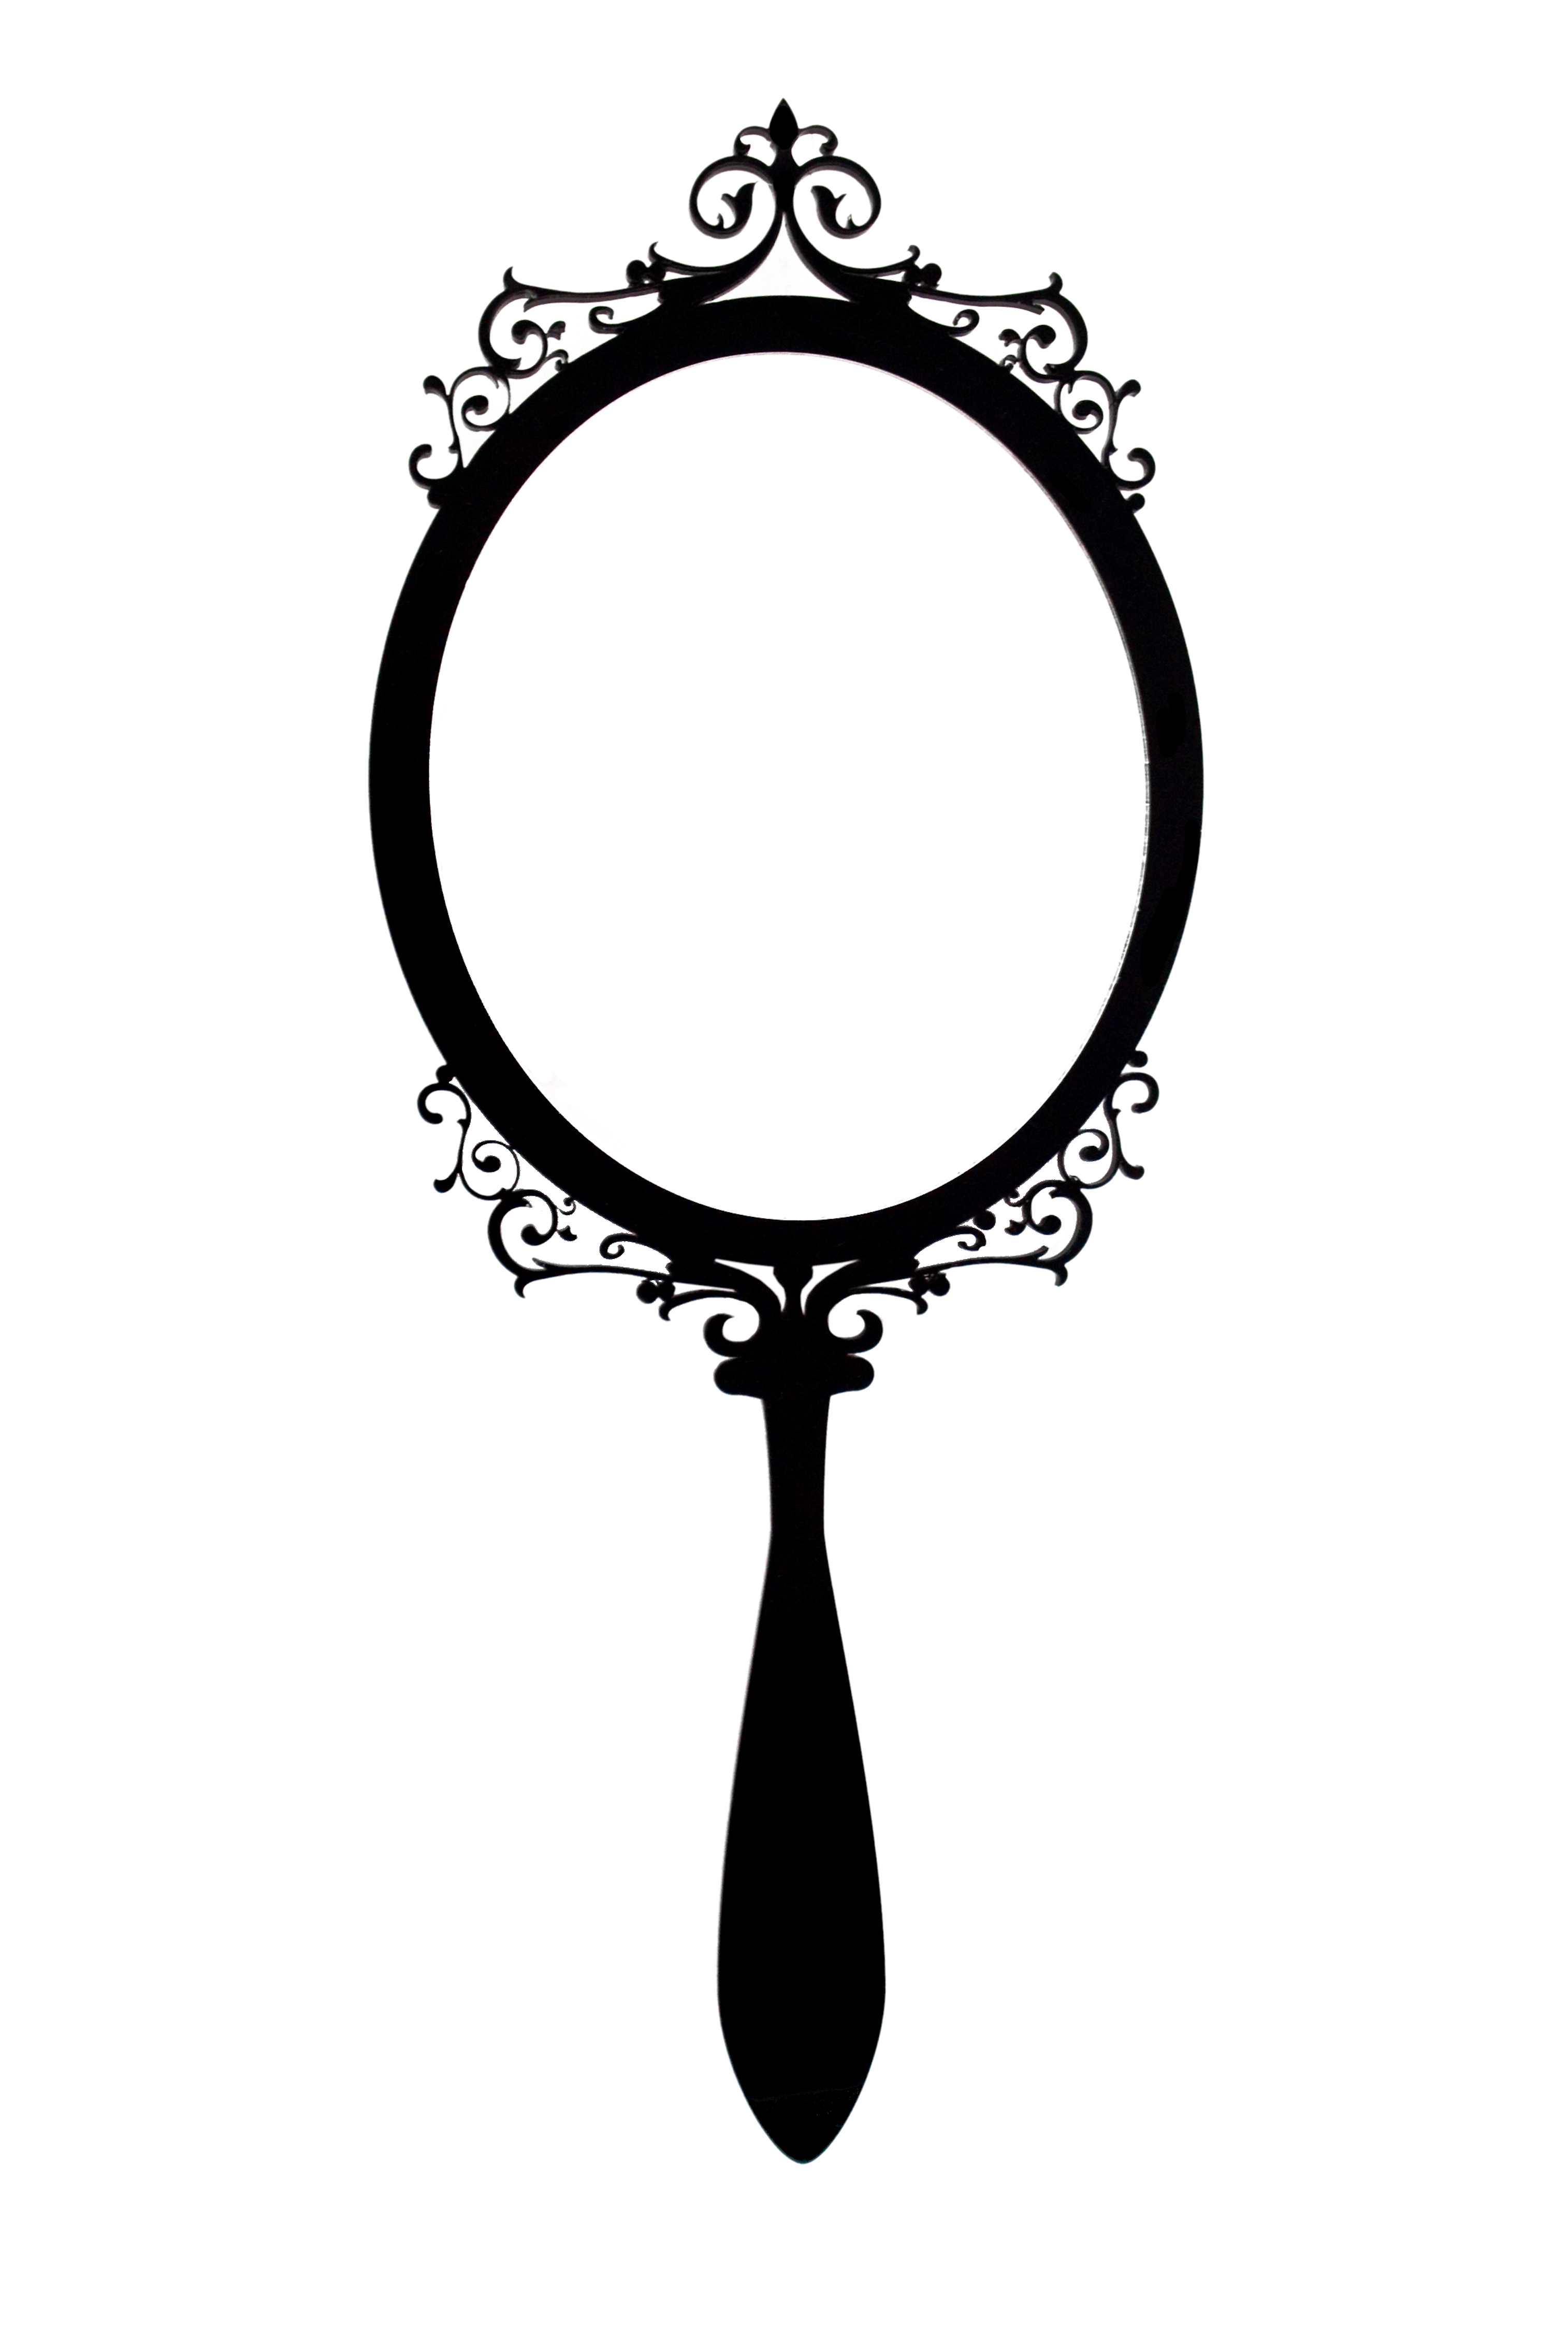 Mirror Black And White Clipart 